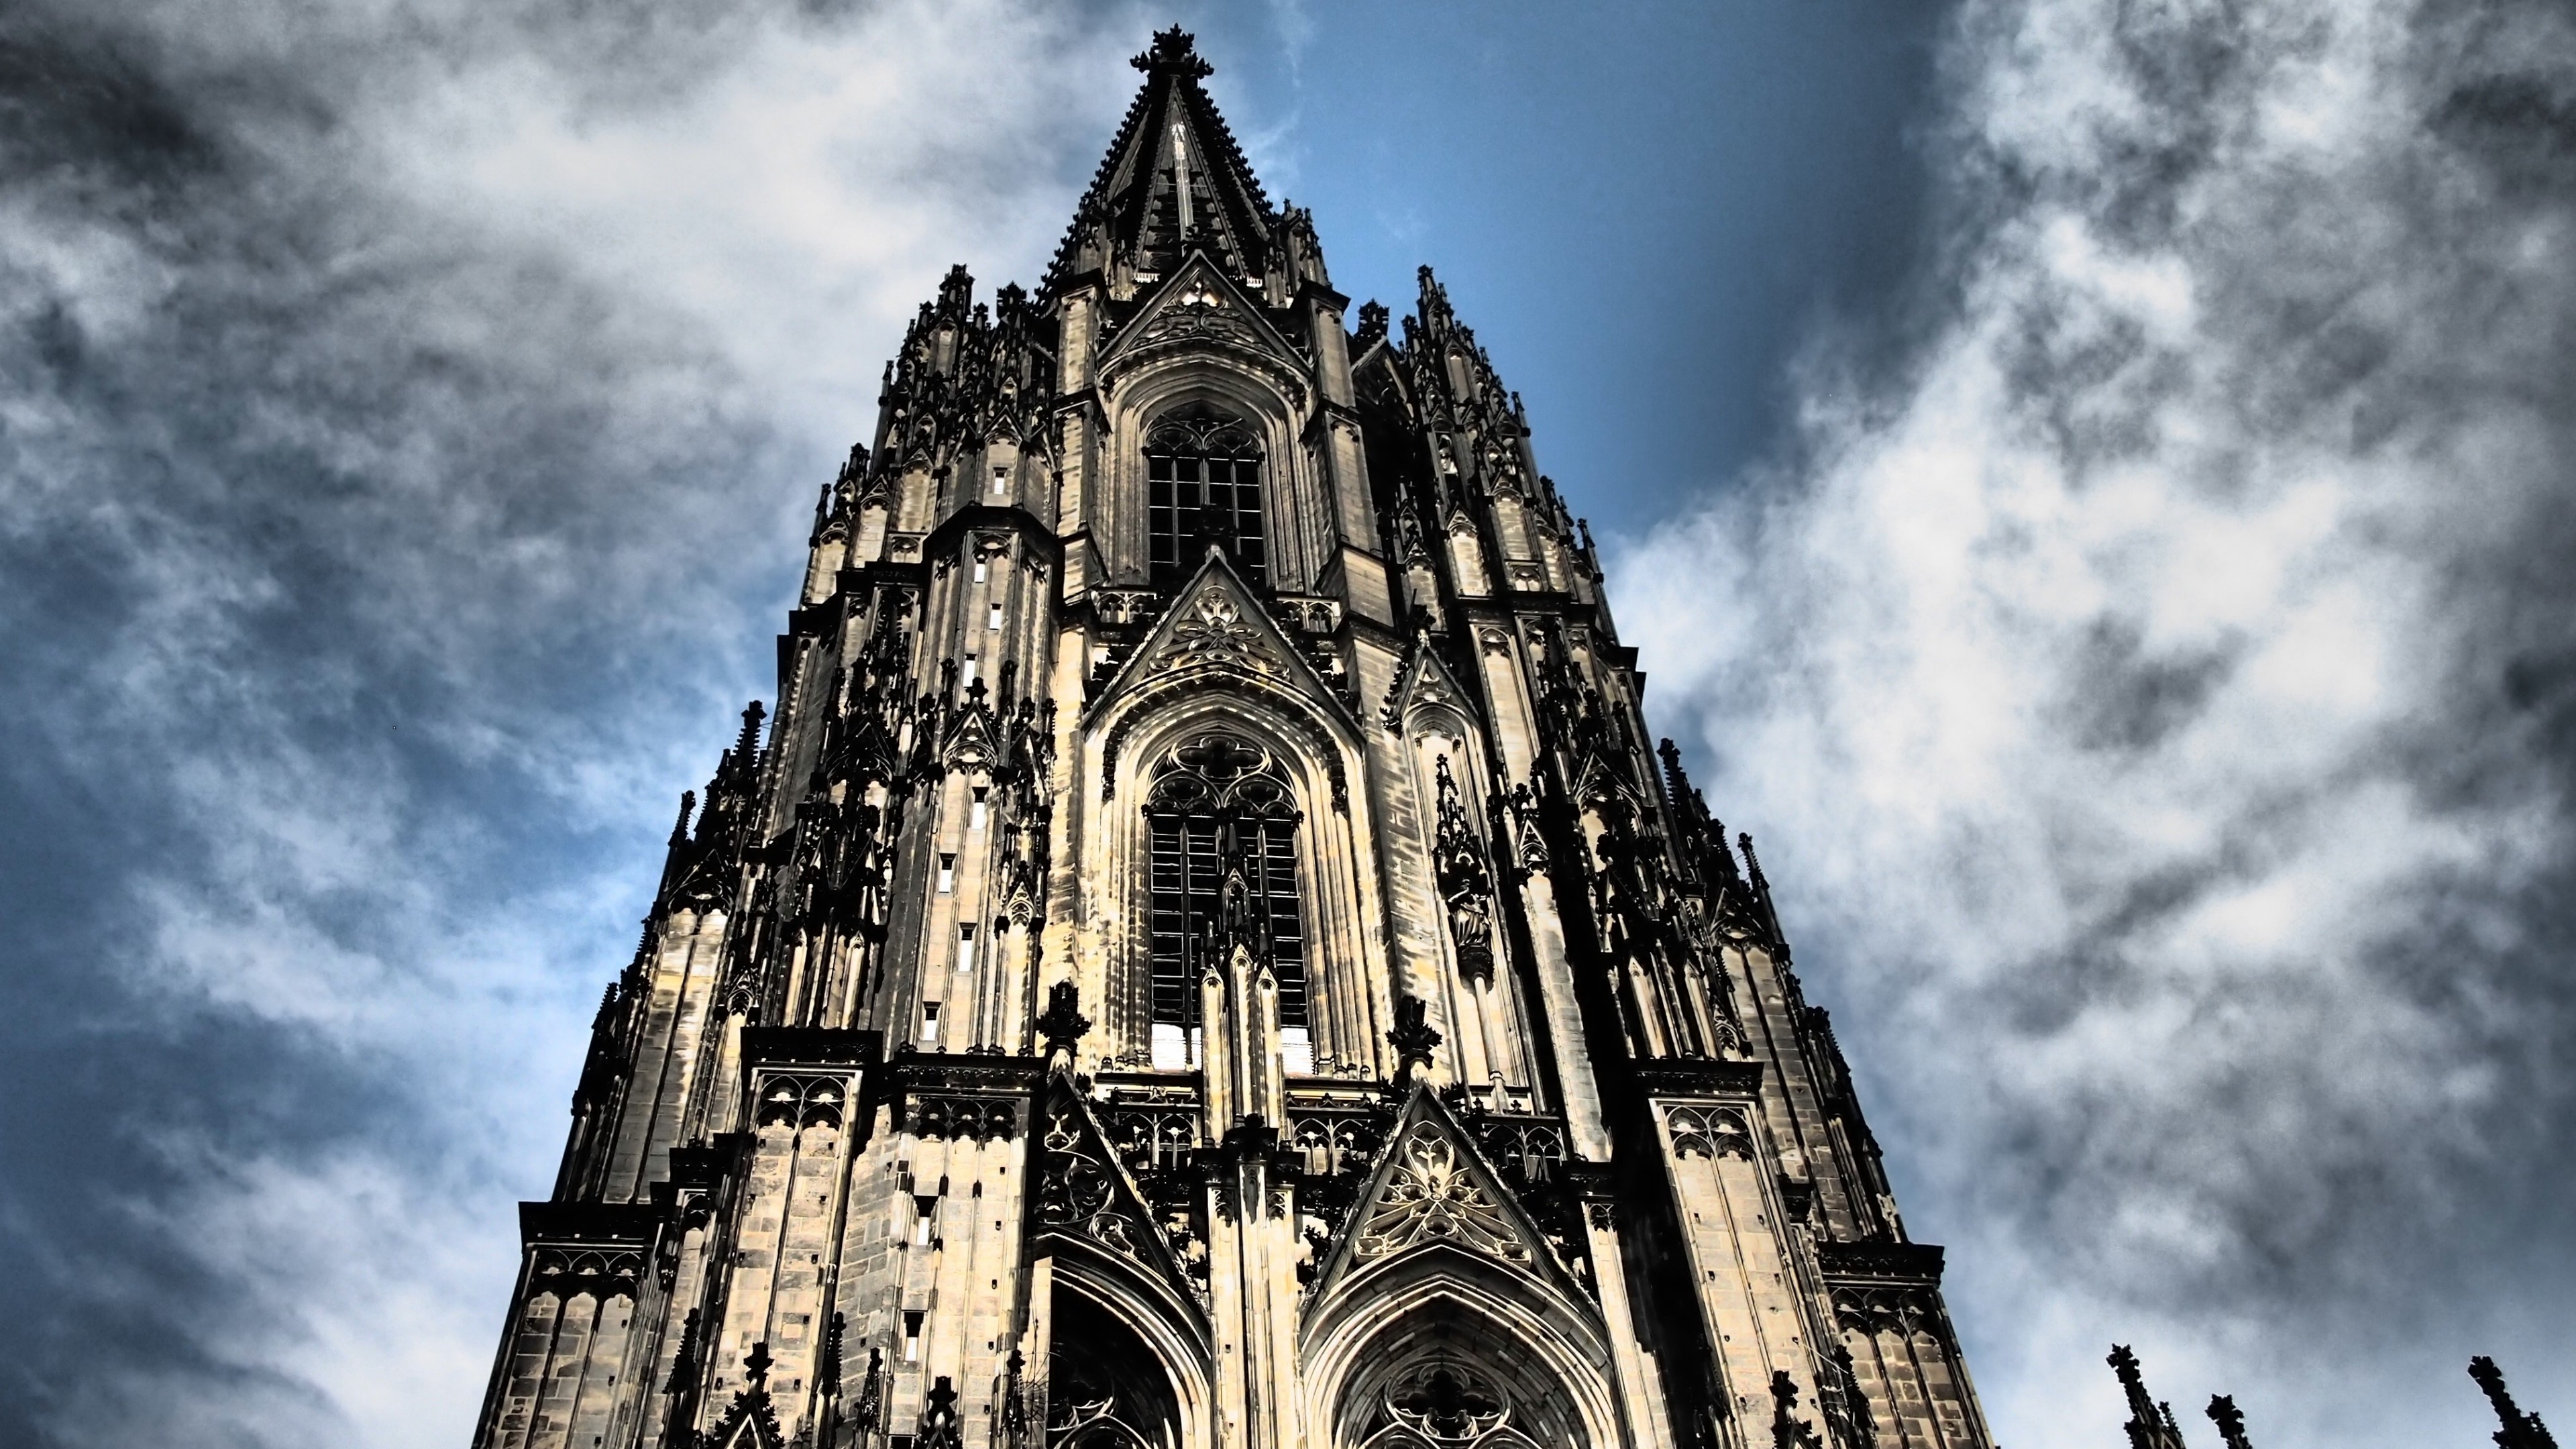 Cathedral: The seat of the Archbishop of Cologne, The largest Gothic church in Northern Europe. 3840x2160 4K Wallpaper.